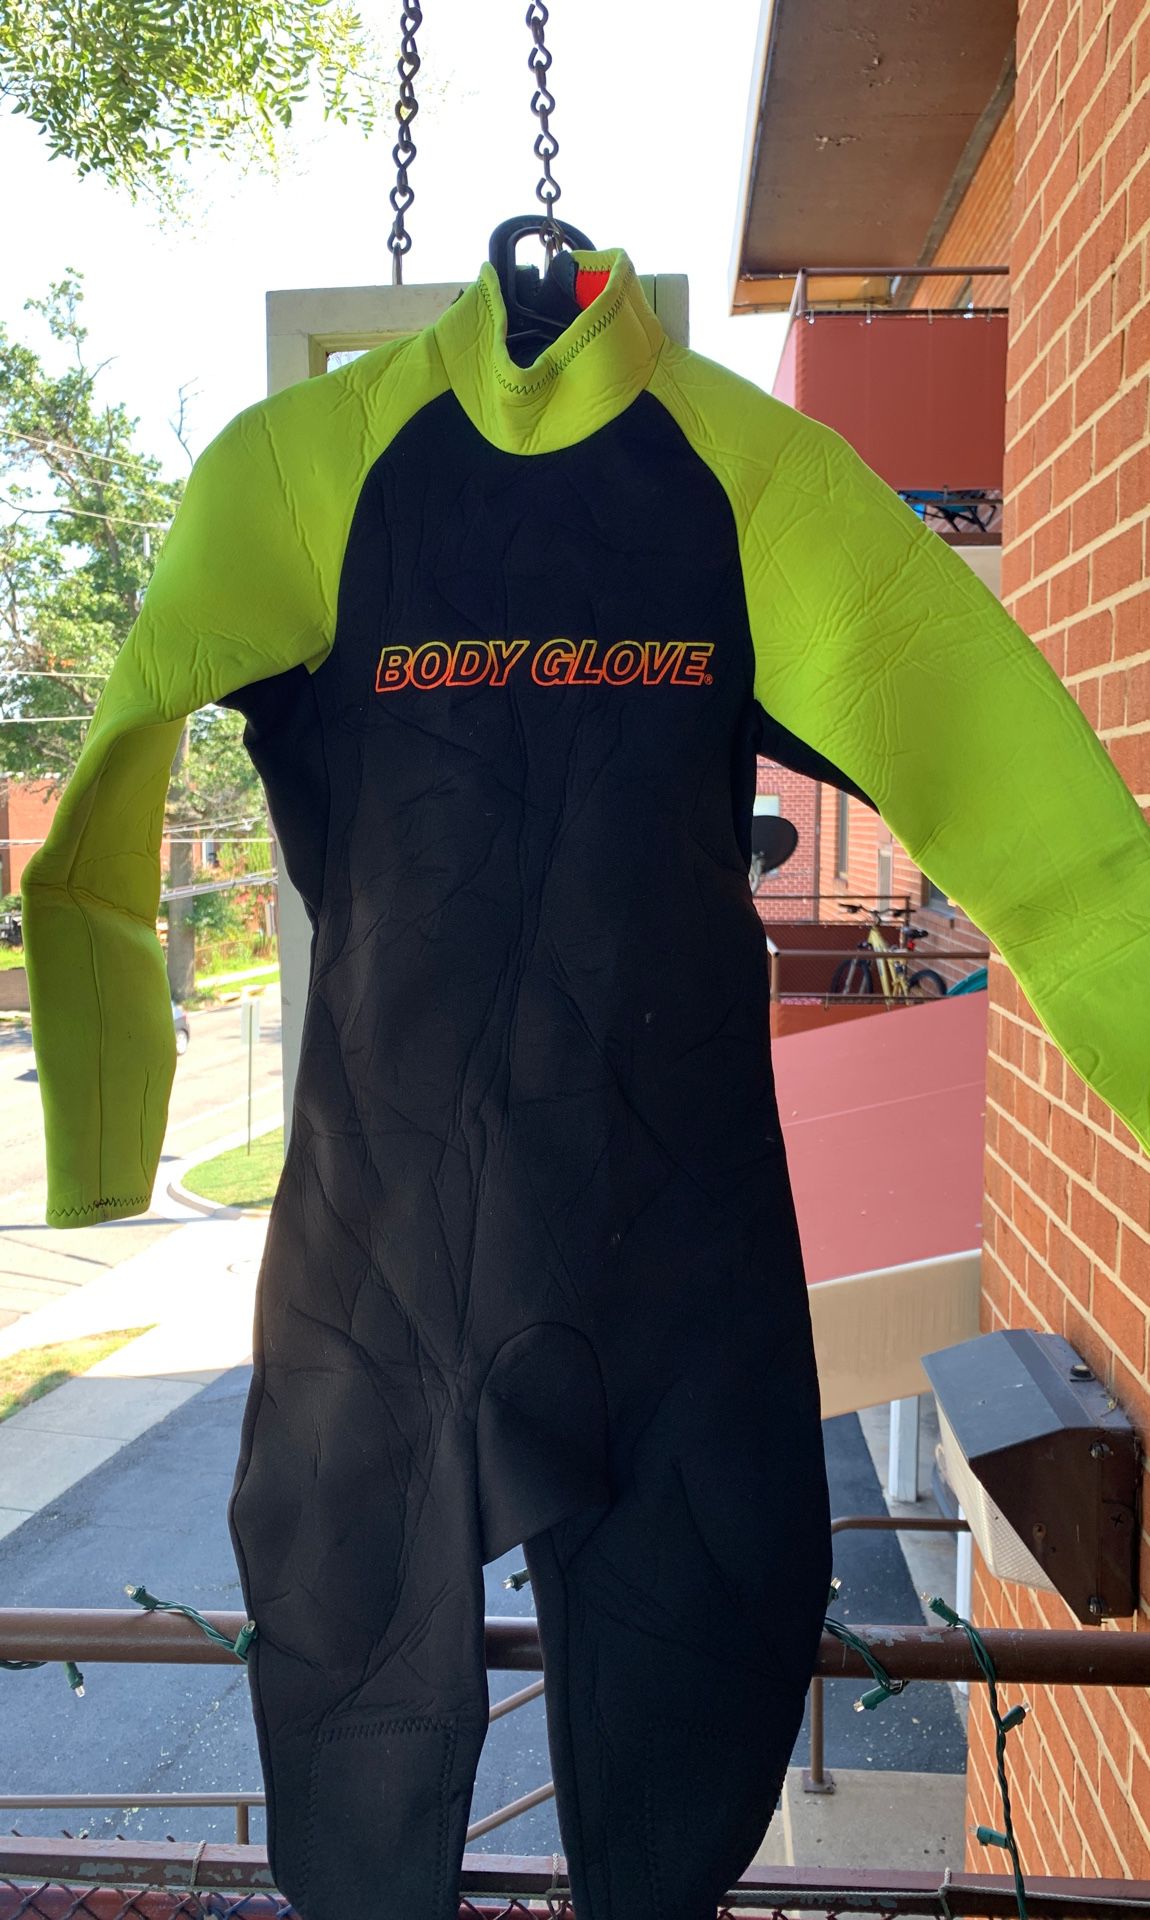 Body Glove - men’s medium wetsuit. Original owner since the late 80s. Barely used. Neon is solid. Boxed away for years.